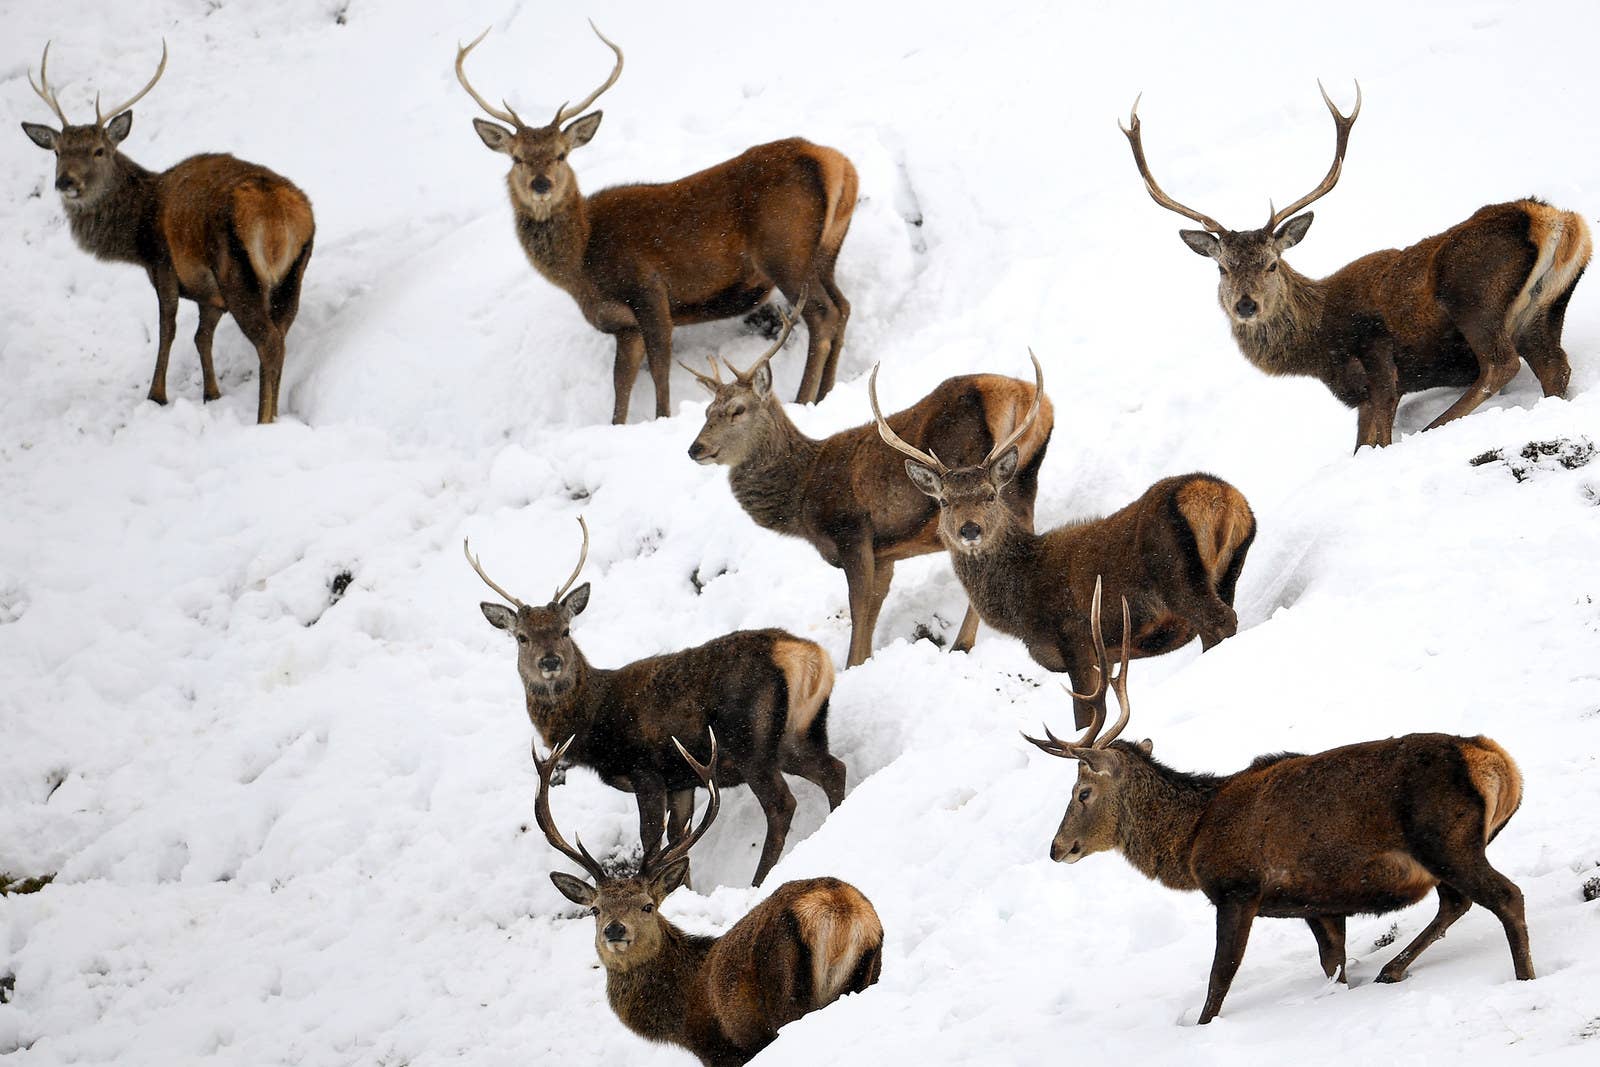 Deer graze in the snow in Braemar, Scotland, on Feb. 15. Police are warning of hazardous driving conditions across much of the Scottish Highlands.